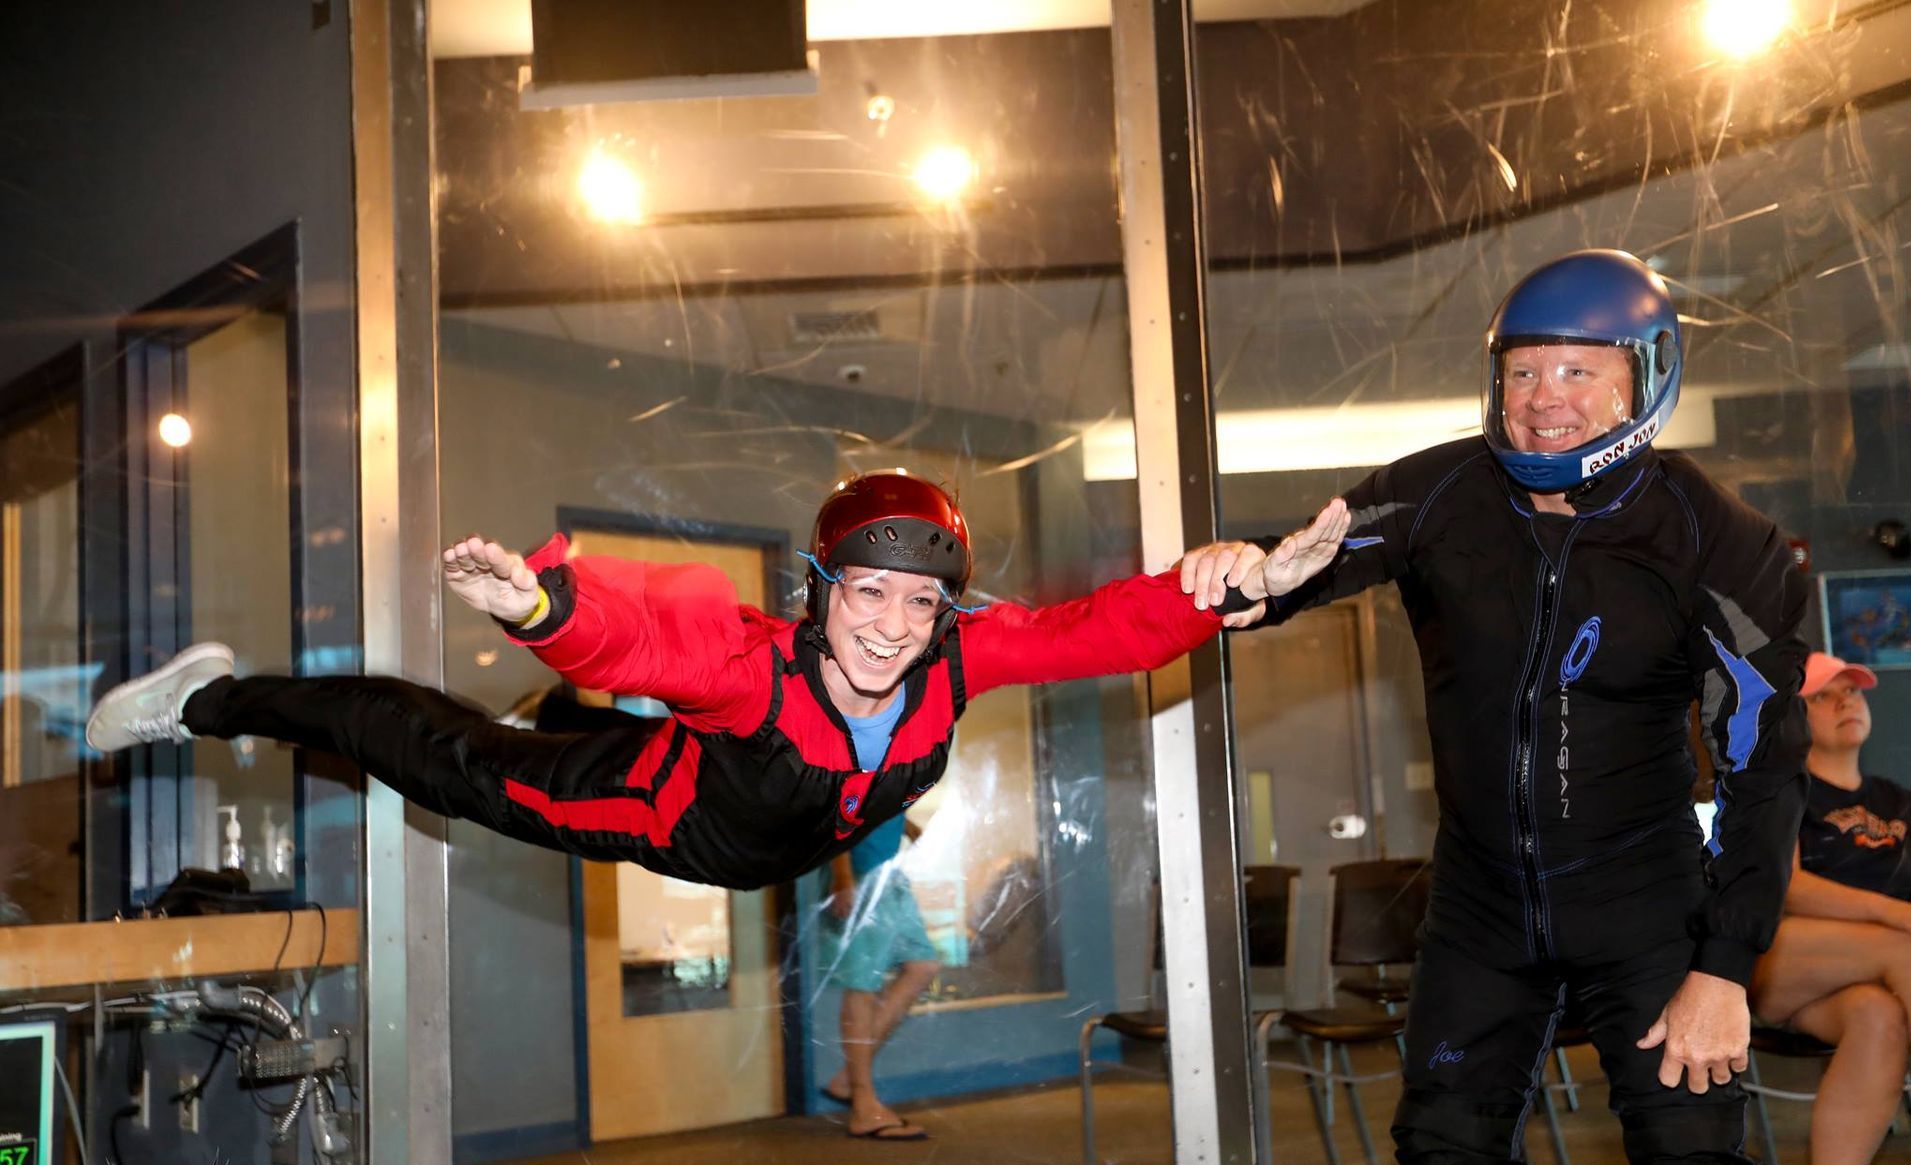 World’s First Skydiving and Indoor Surf Park, world record in Nashua, New Hampshire